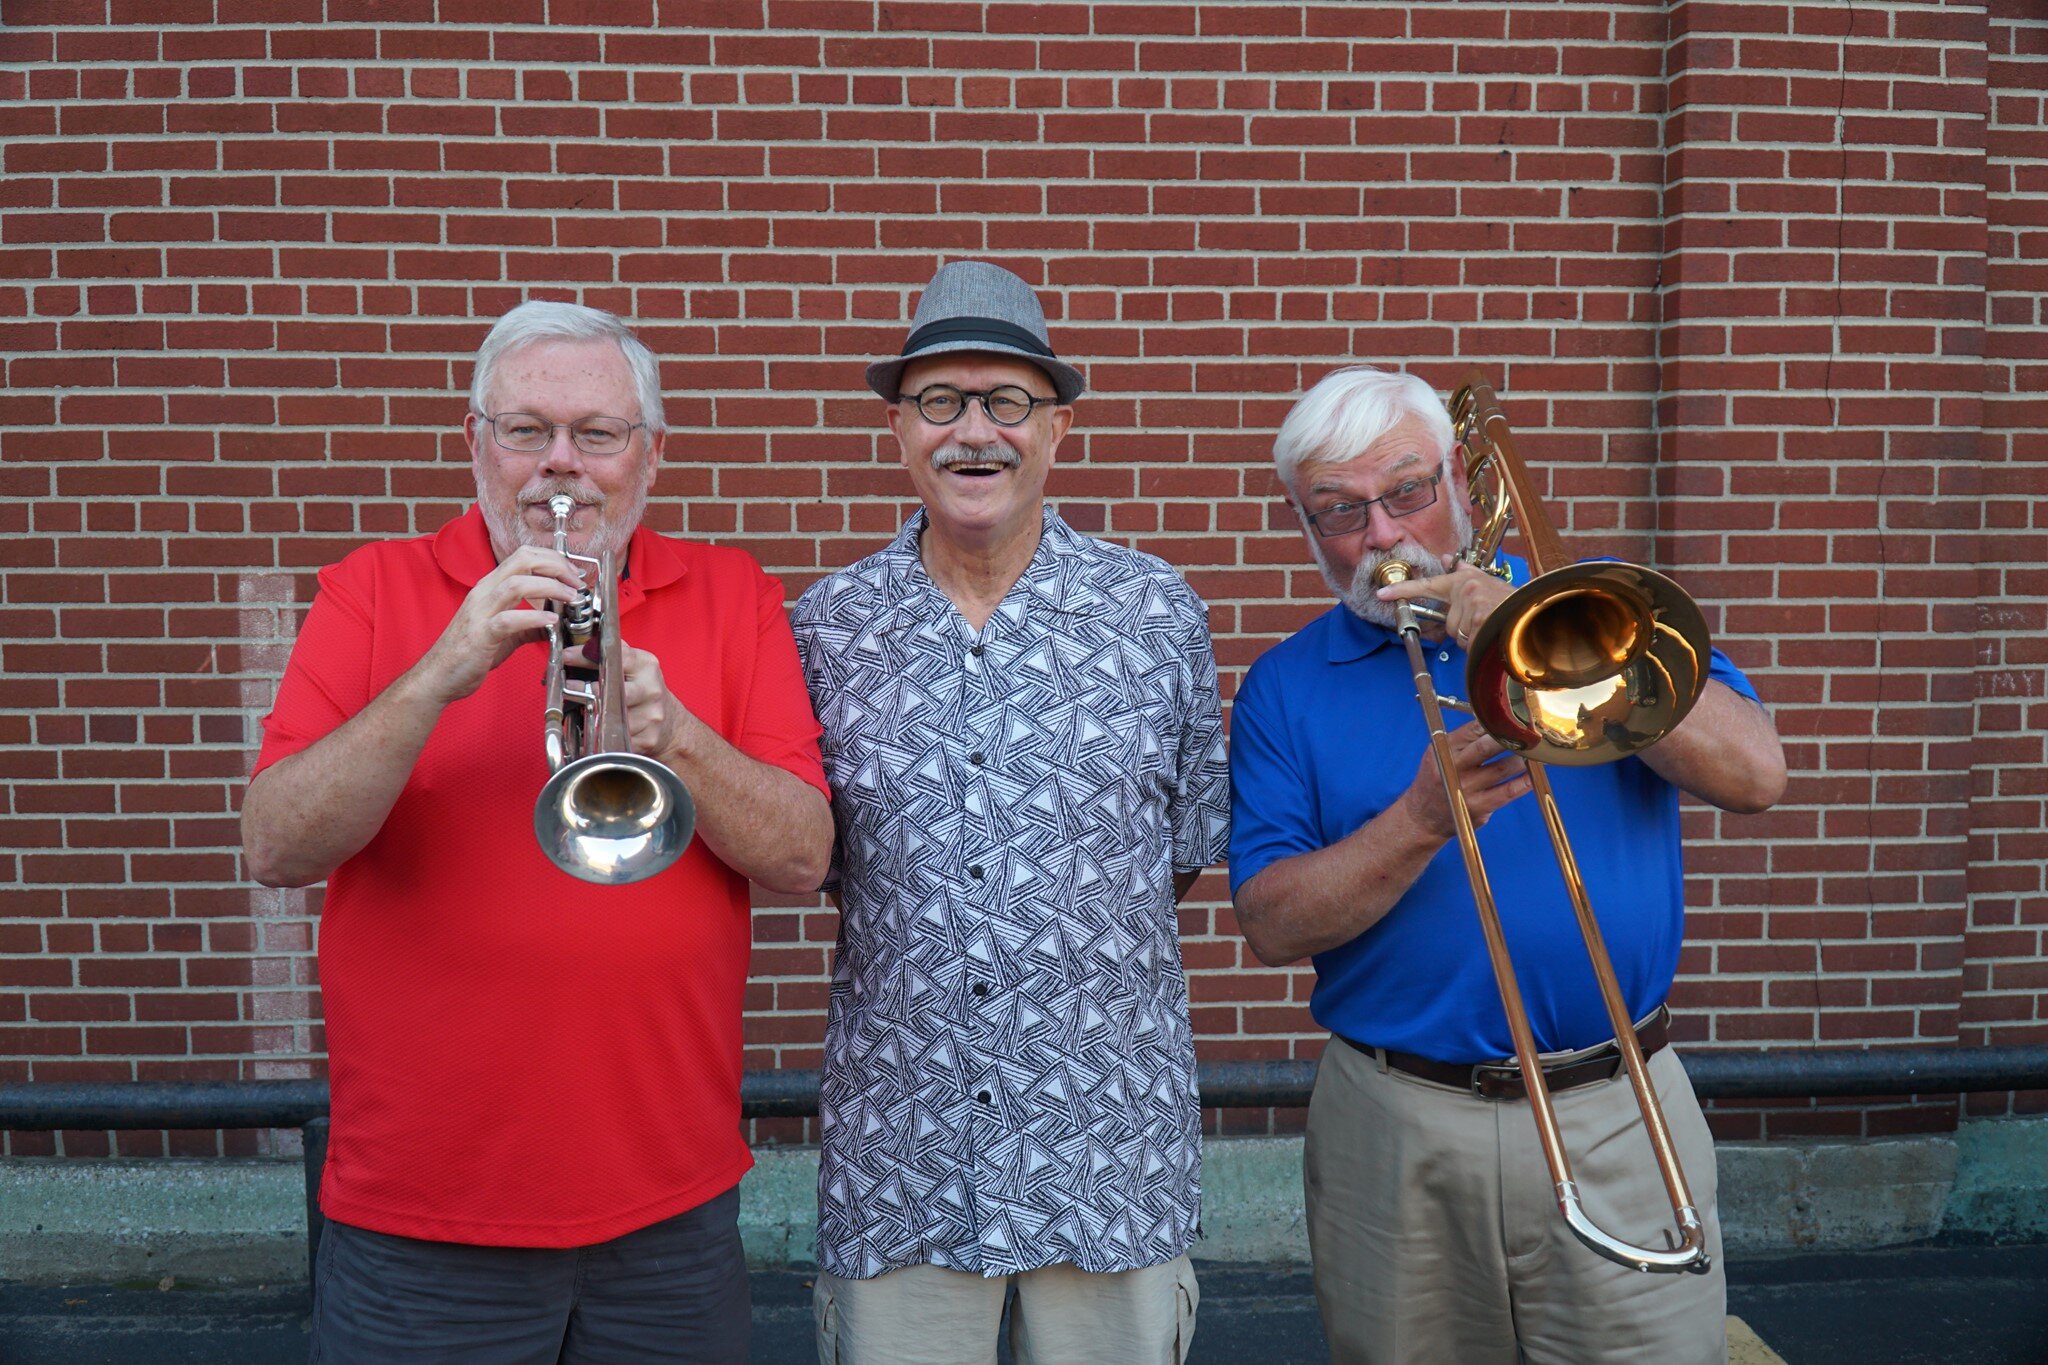 DSP Jazz Trio Plays tonight! @ 7pm - 10pm
DSP Jazz Trio is made up of Derek Reiss, trumpet &amp; flugelhorn, Skip Taylor, electronic drum set, and Pete Mark, trombone &amp; vocals. D for Derek, S for Skip and P for Pete, playing songs from the Americ